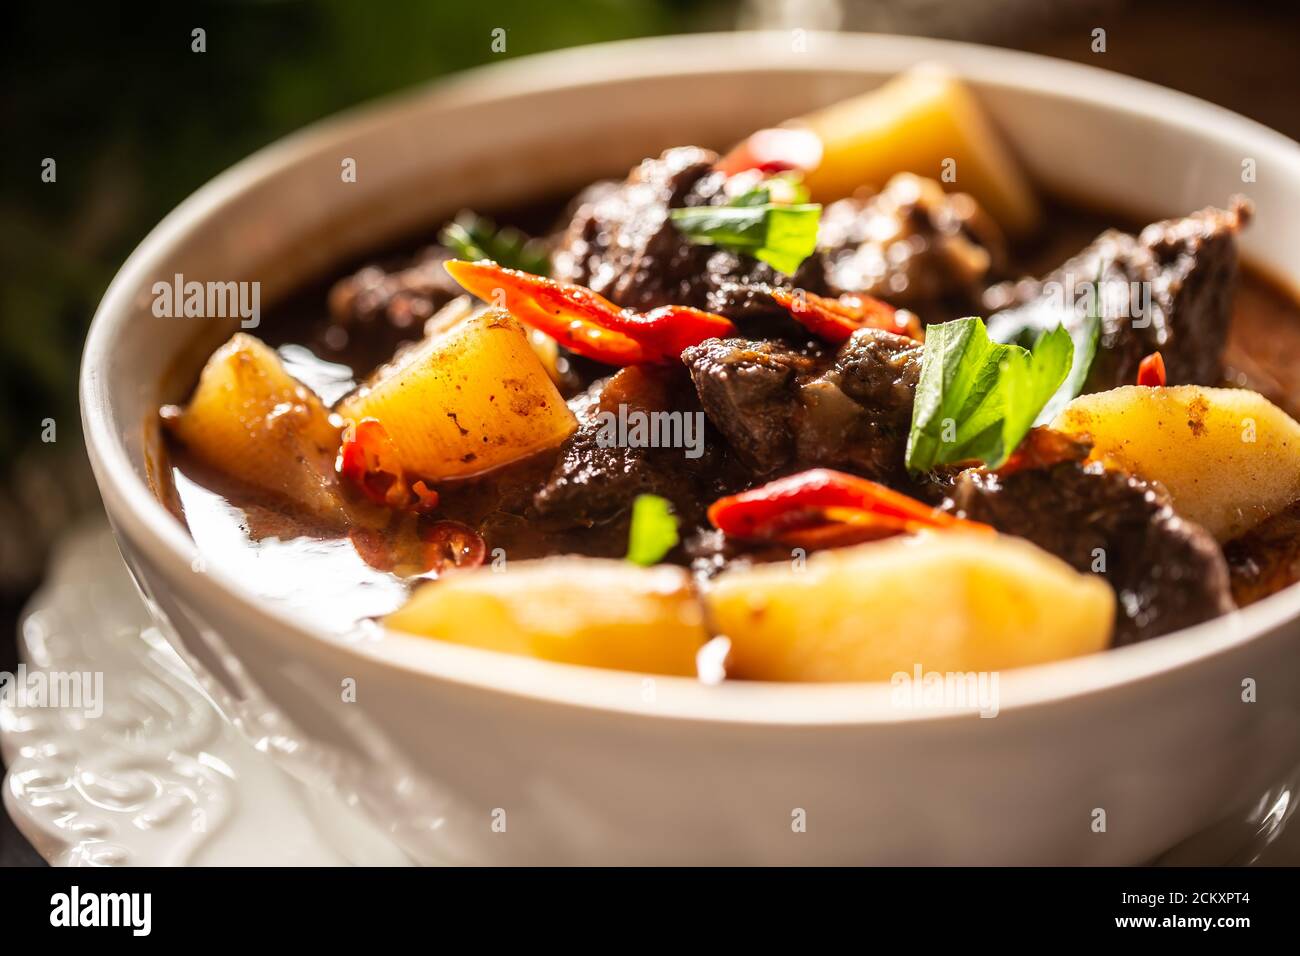 Bowl of goulash with meat, potatoes, chillies and parsley Stock Photo